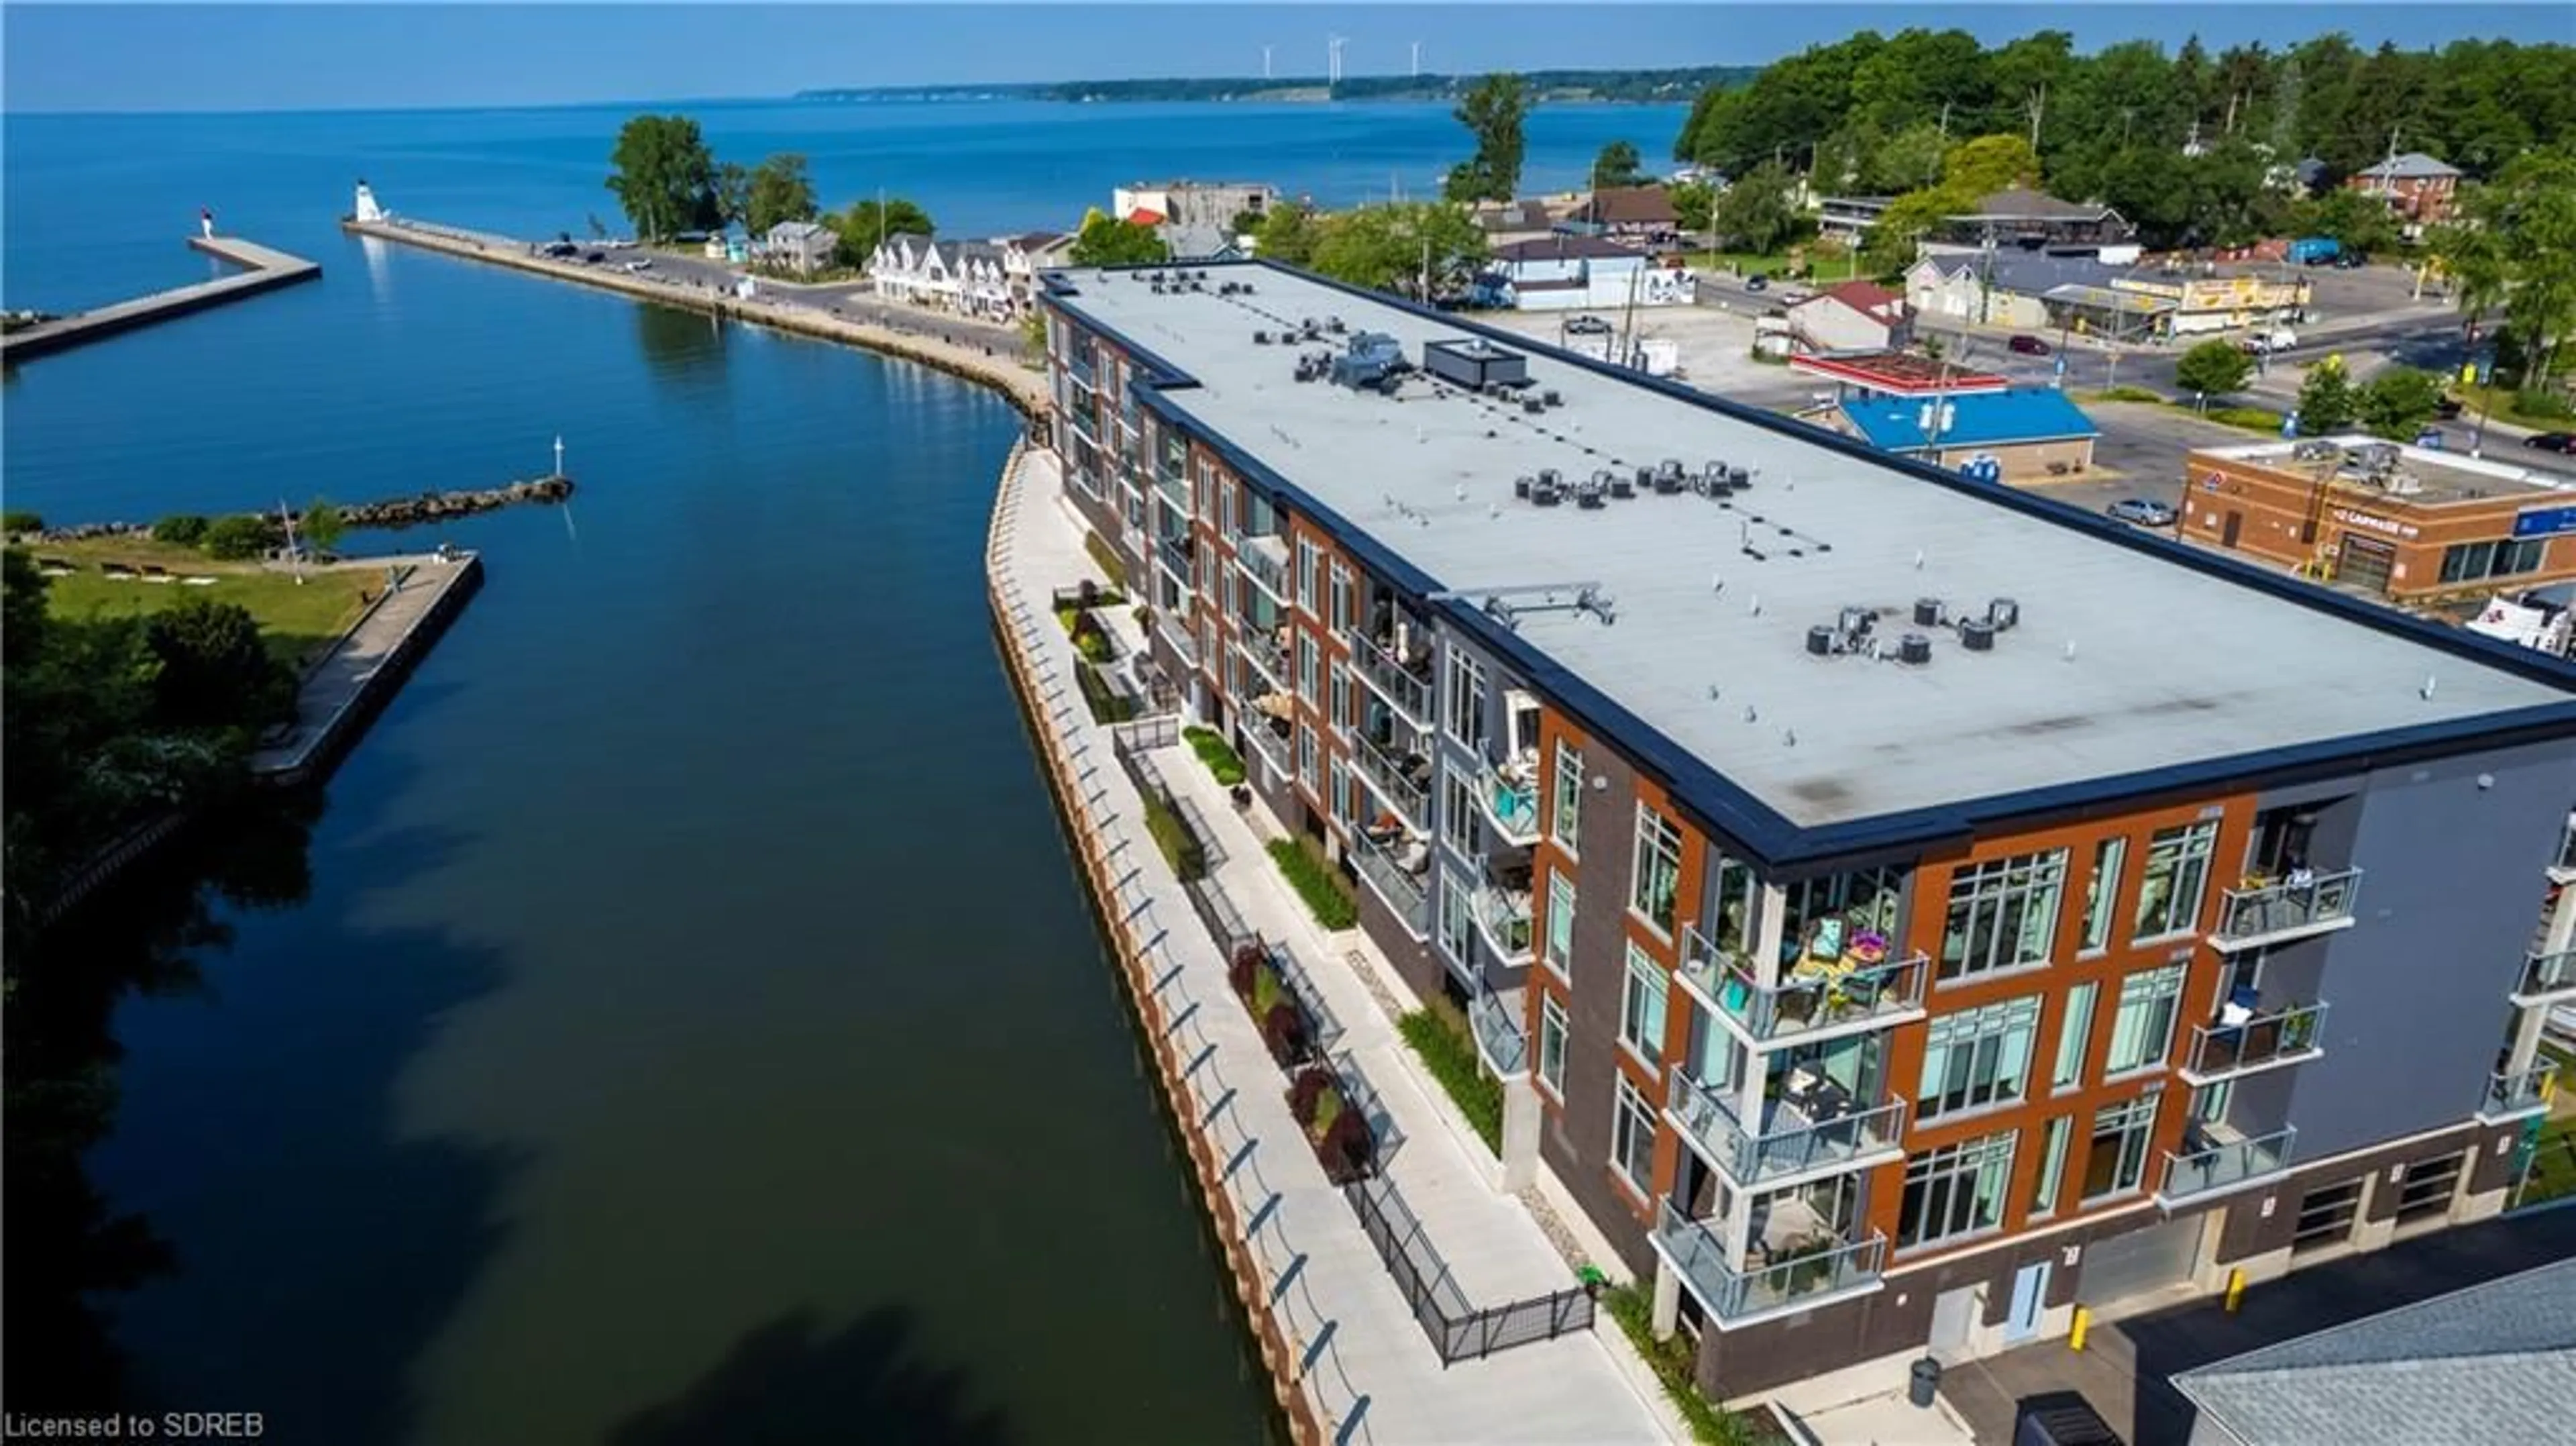 Lakeview for 38 Harbour St #416 PH, Port Dover Ontario N0A 1N0